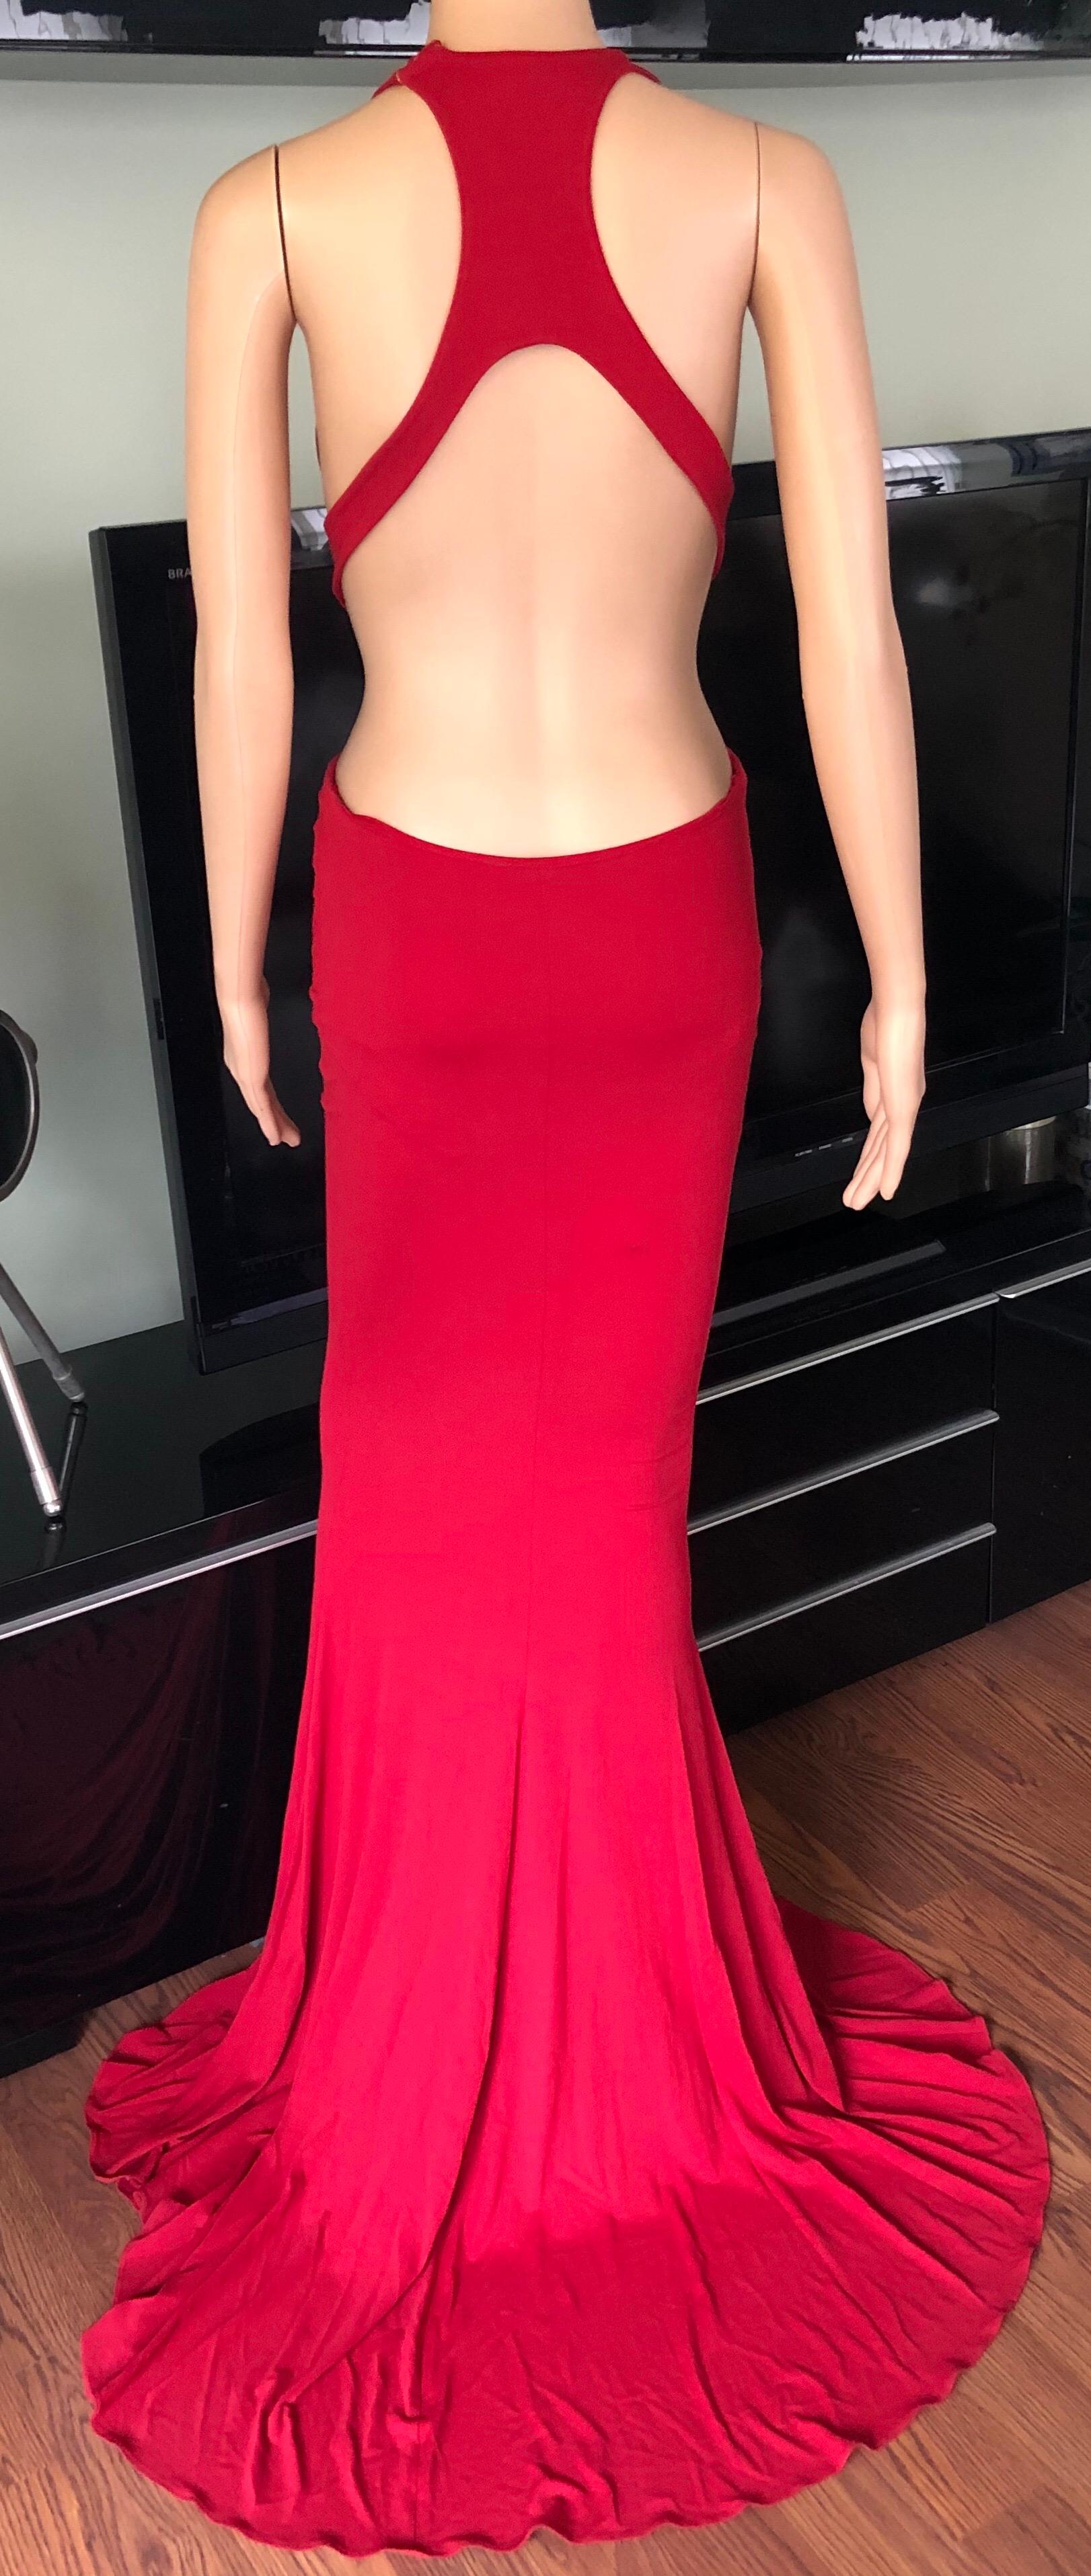 backless red dress